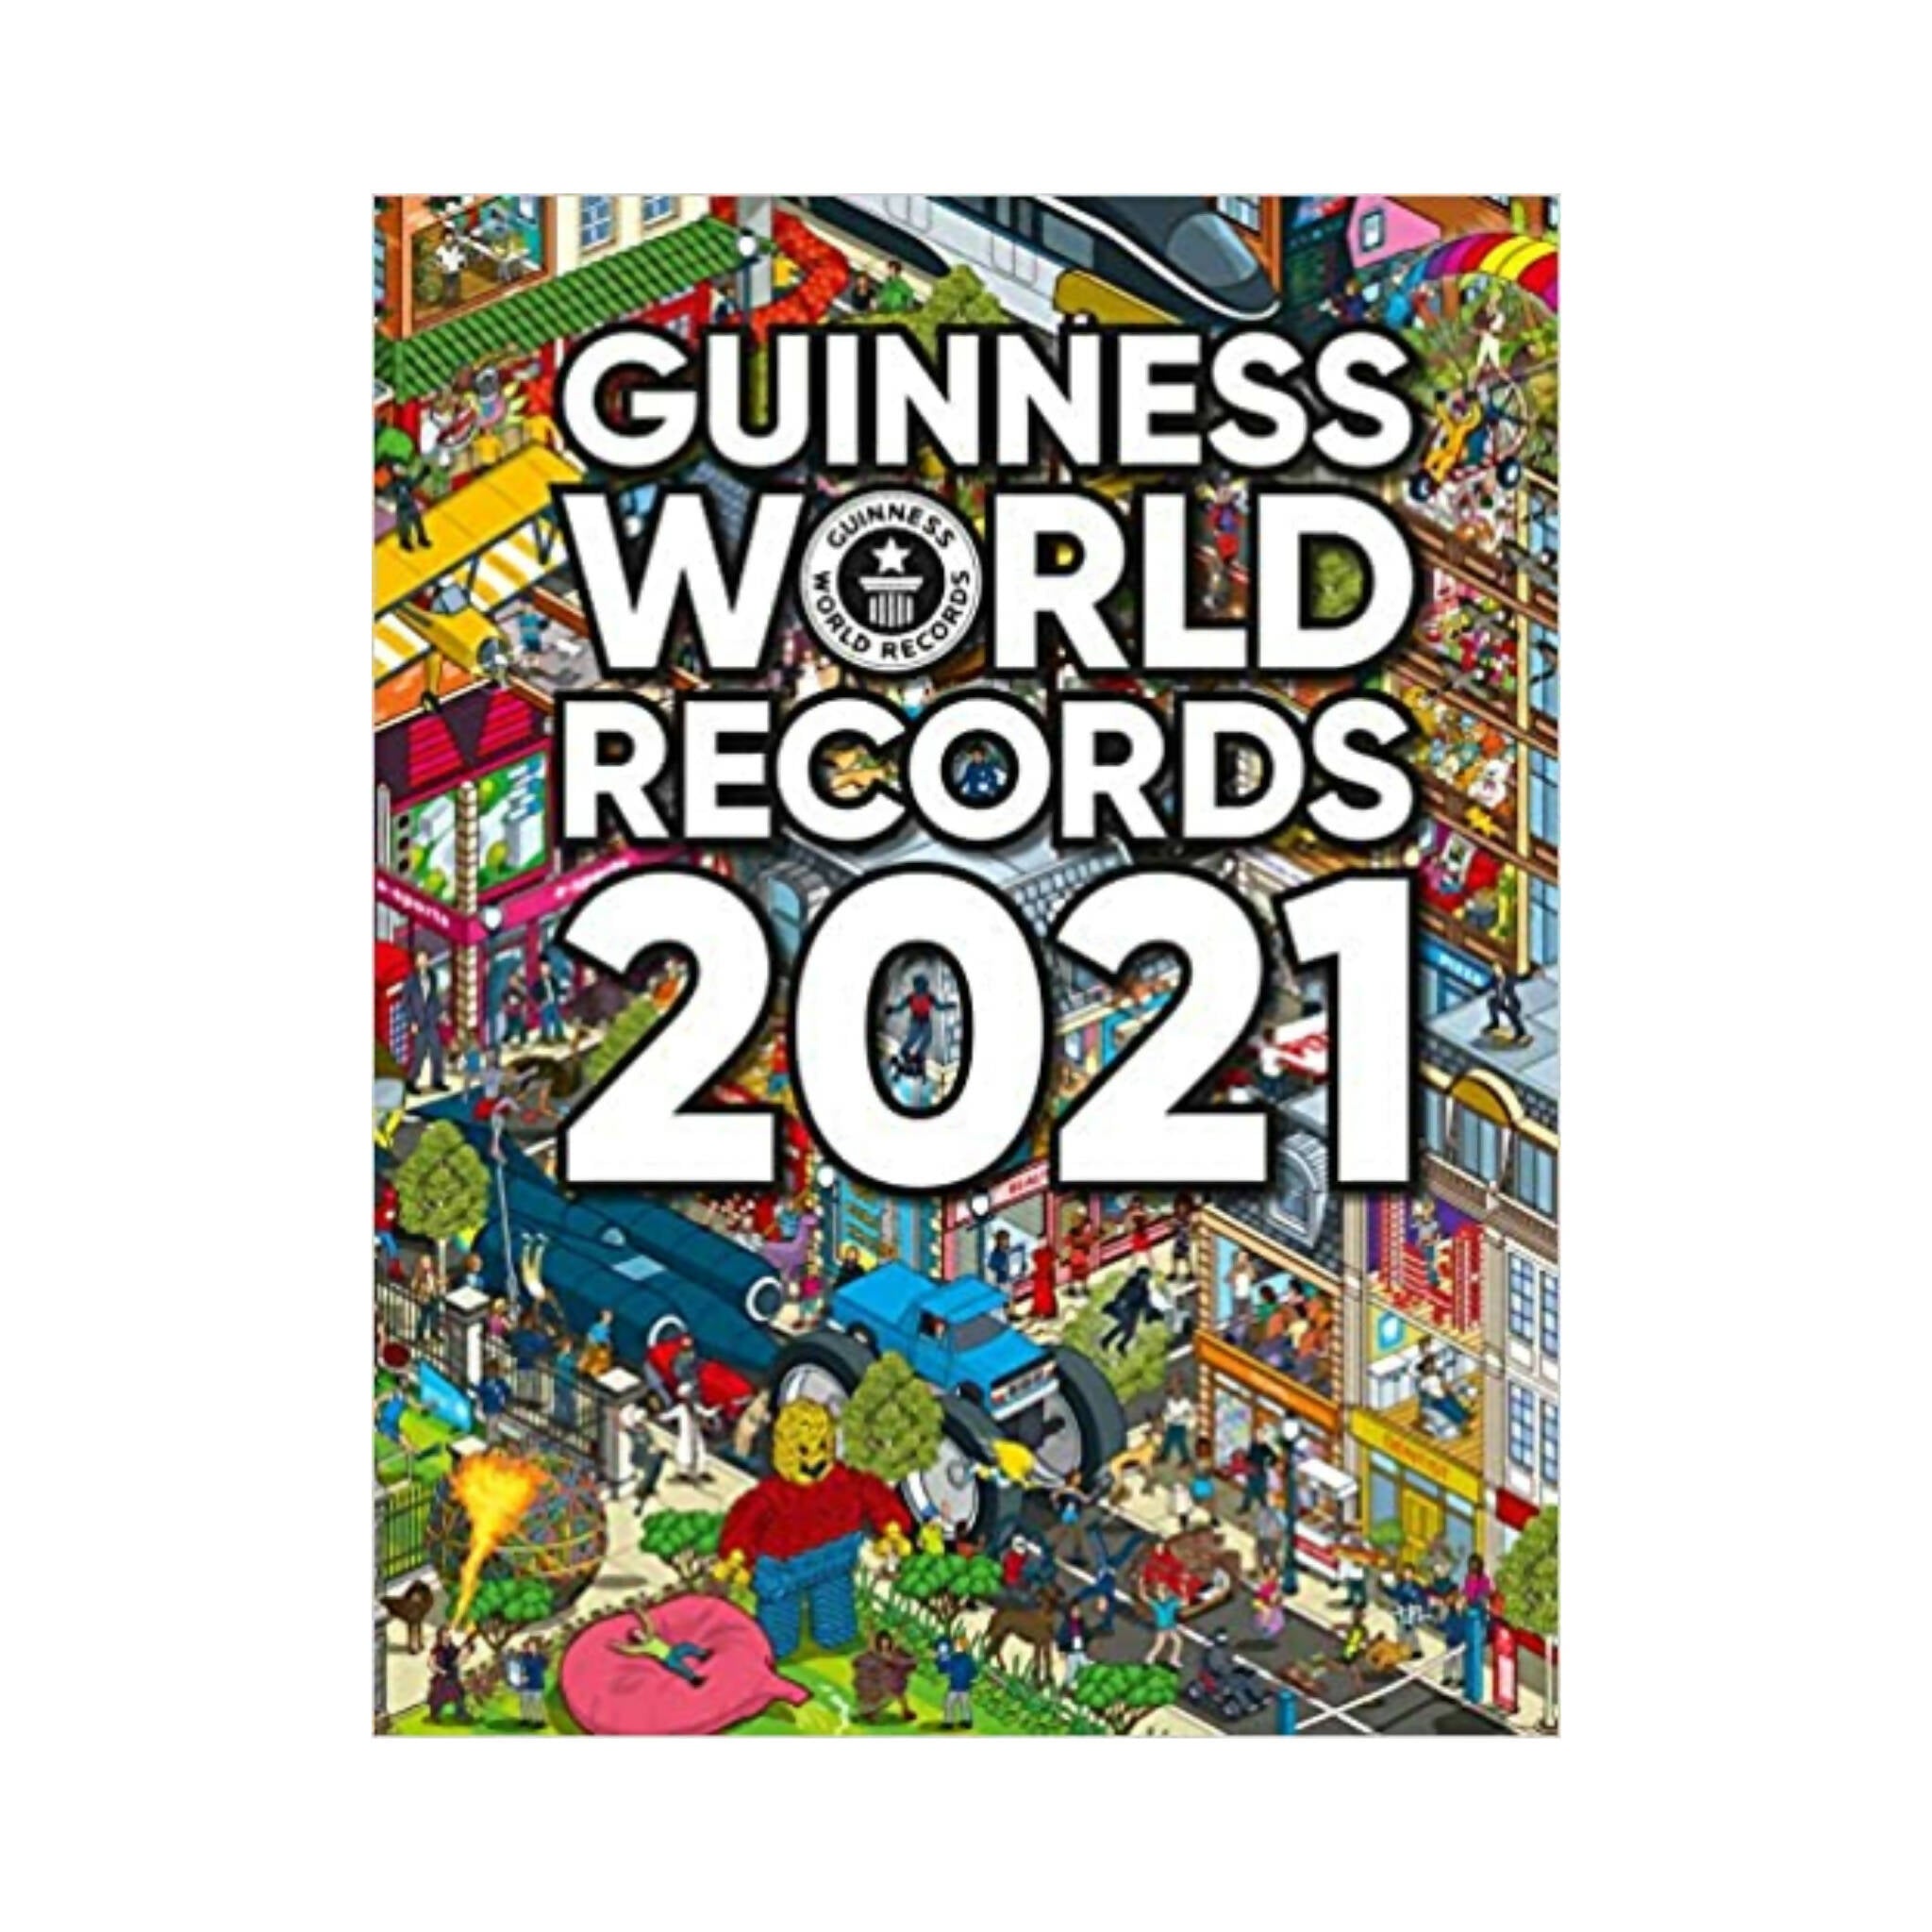 Book, Guinness World Records 2021 Hardcover